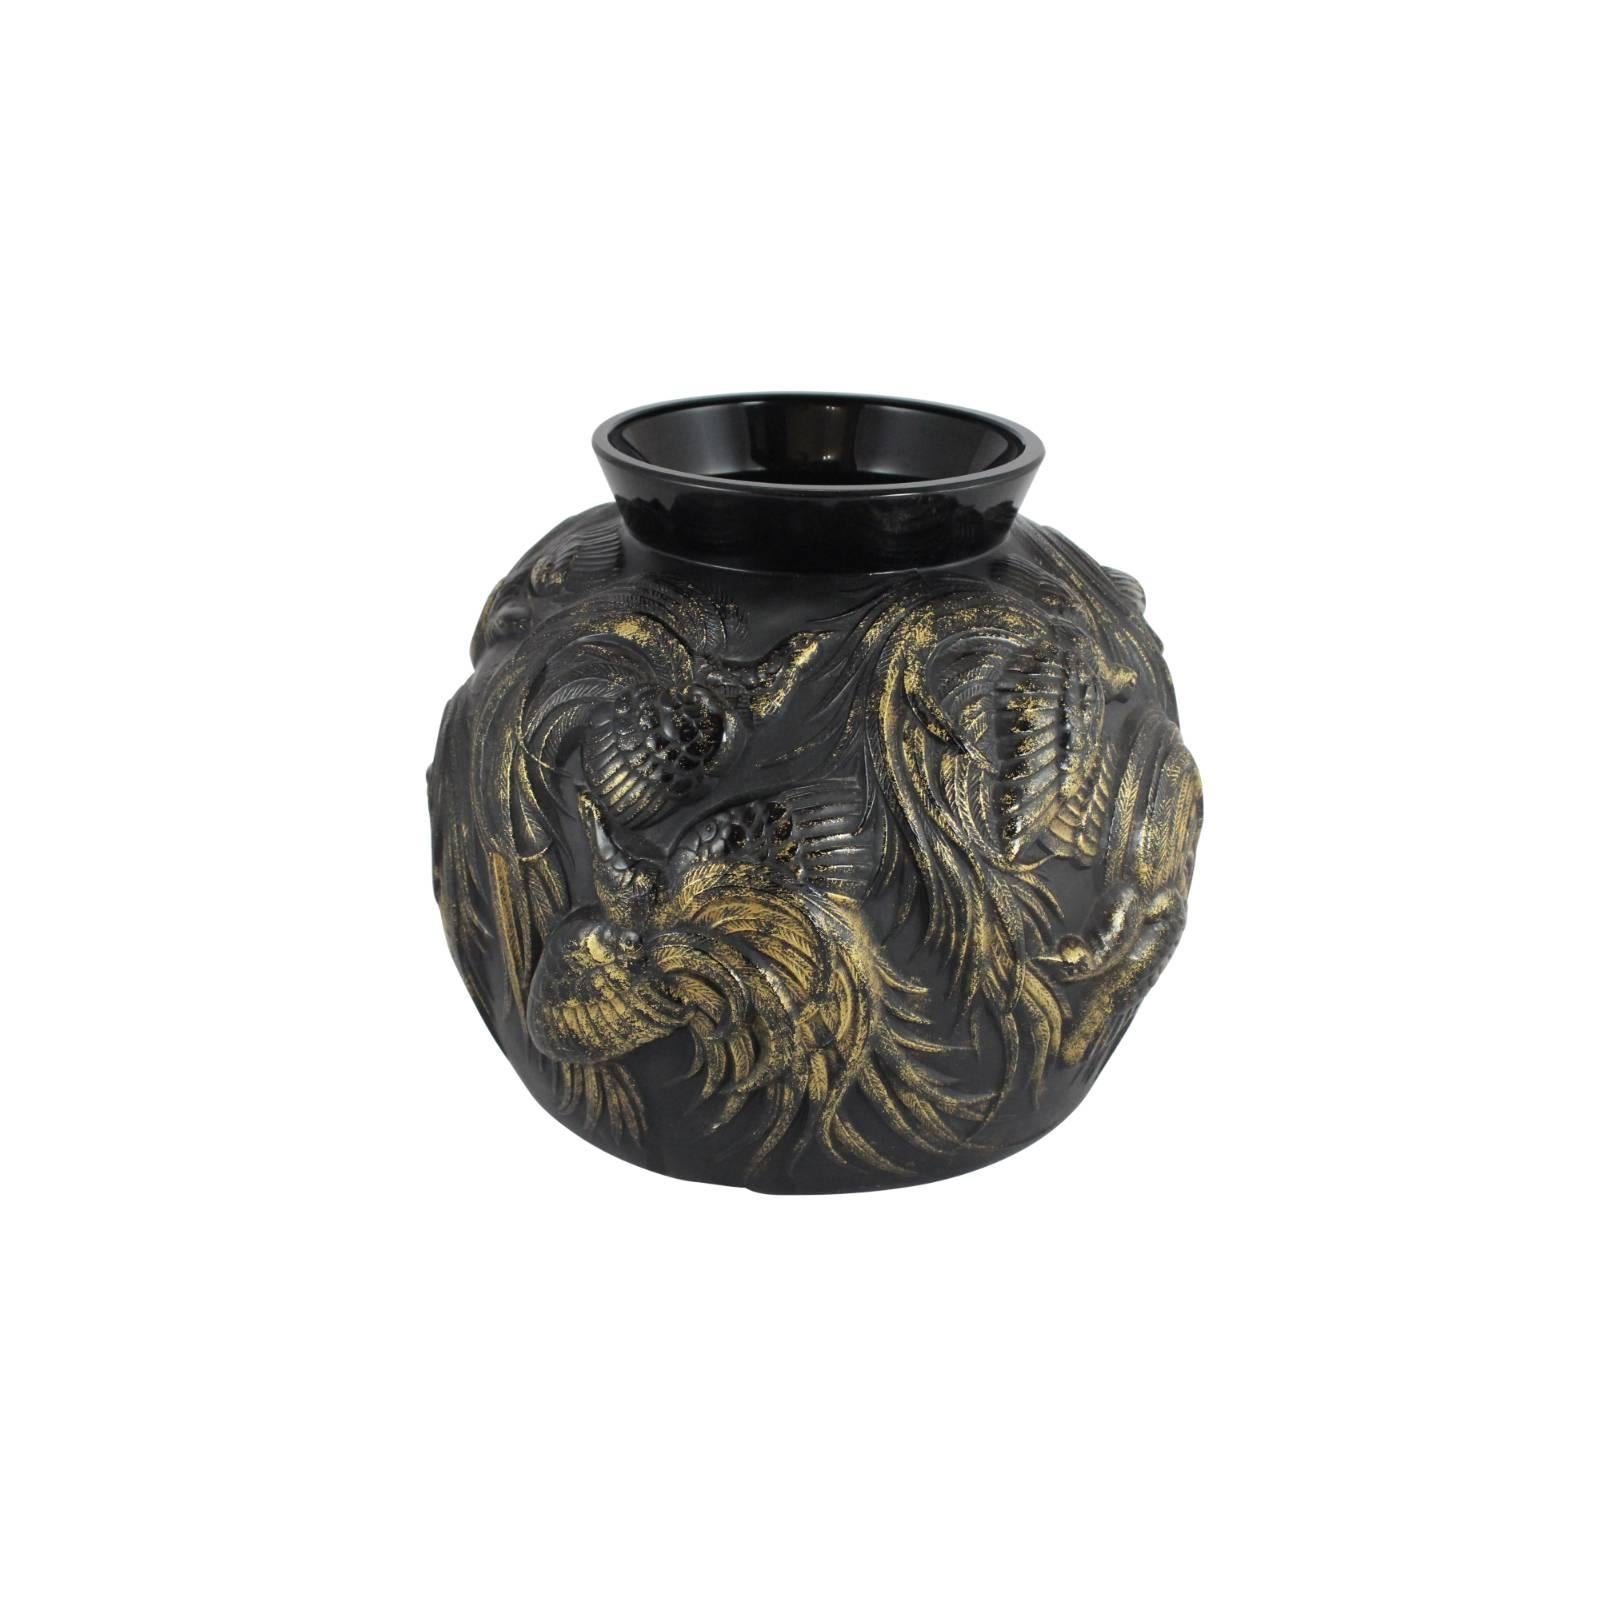 This rare work by Sabino is mould-blown black glass fully embellished with gold enamel and depicts a scene of birds in flight. Signed to base.